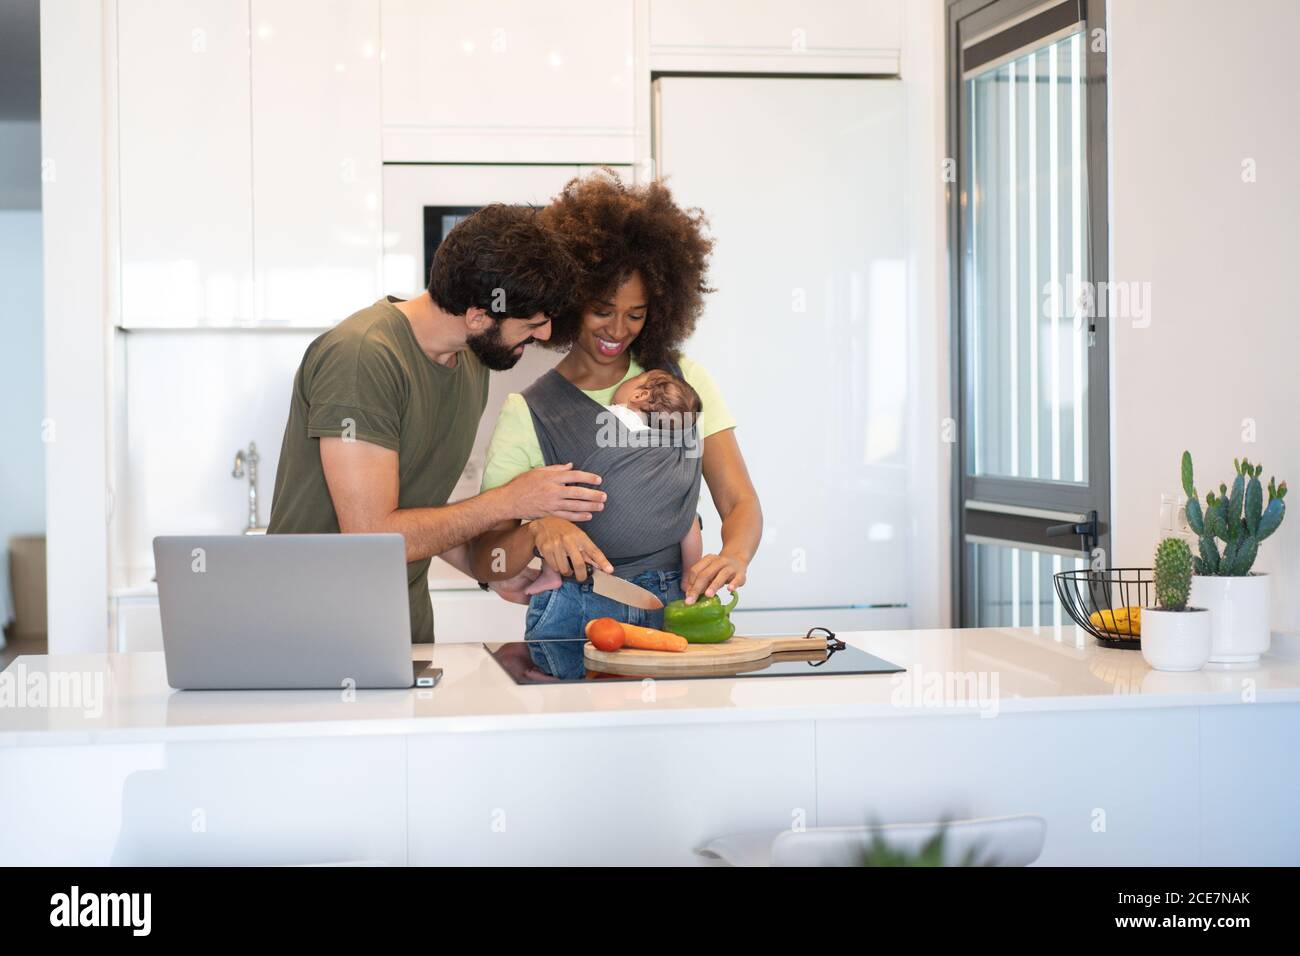 Content black mother with baby in sling cutting vegetables and Arab father working on laptop while standing at counter in kitchen Stock Photo